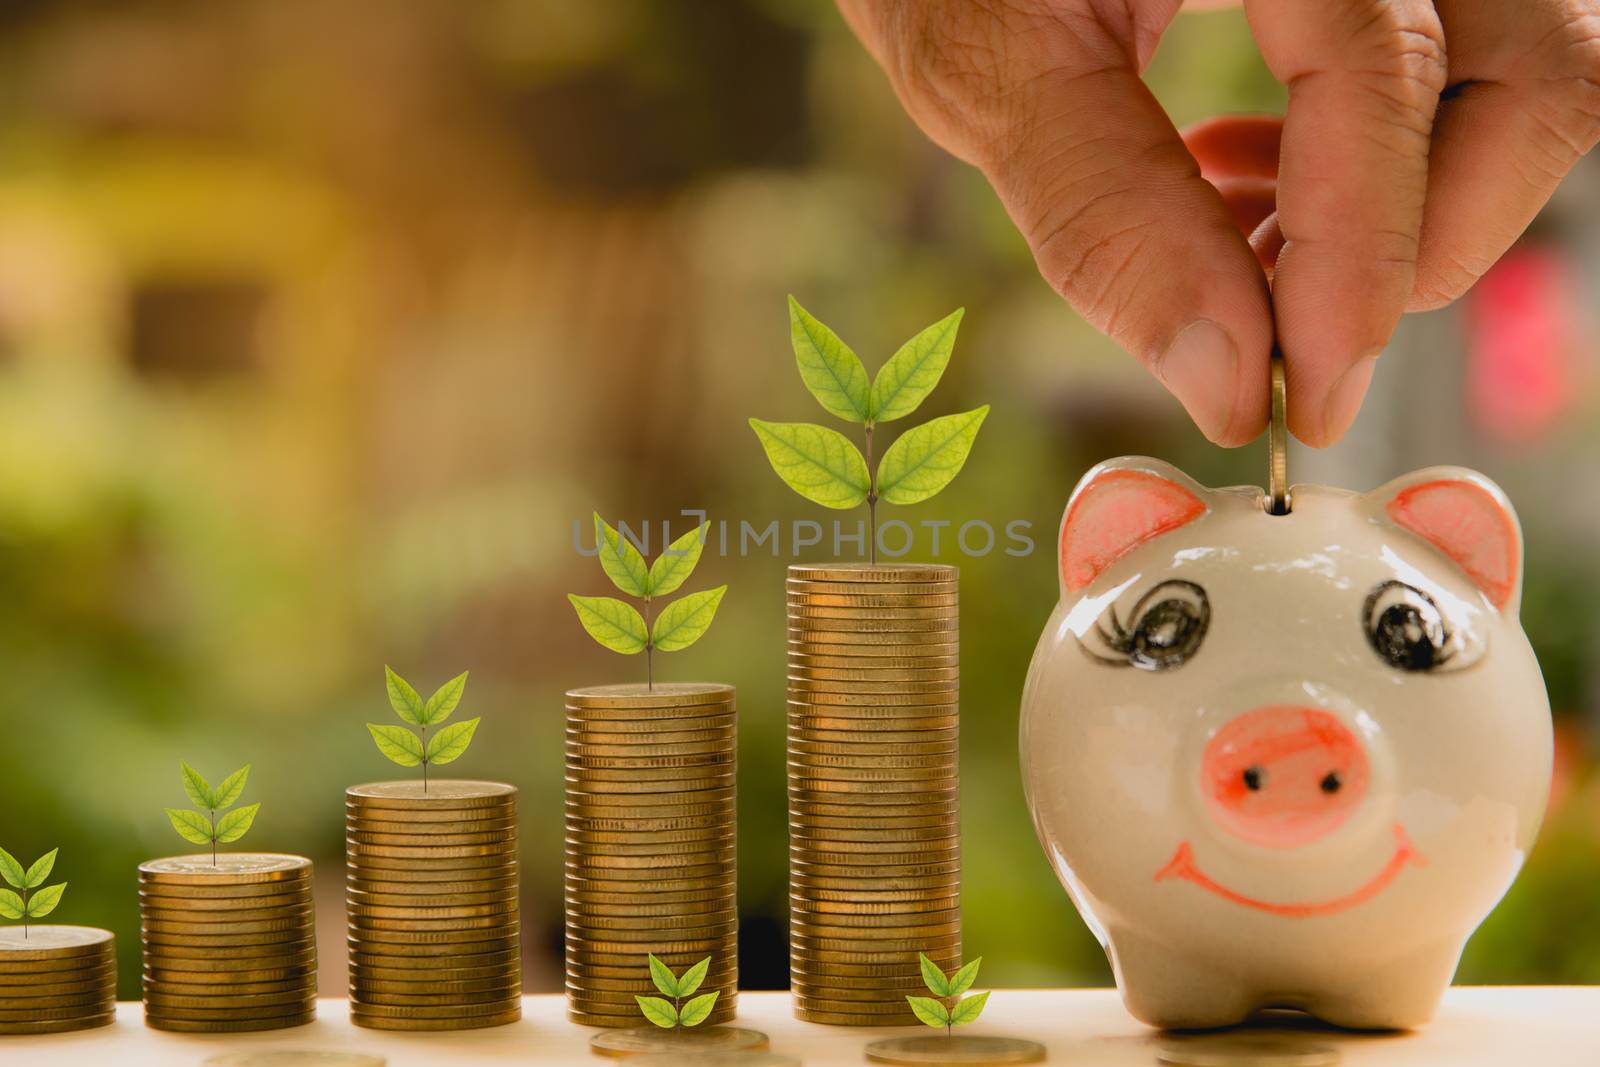 Saving money concept and hand putting money coin into piggy bank growing for business